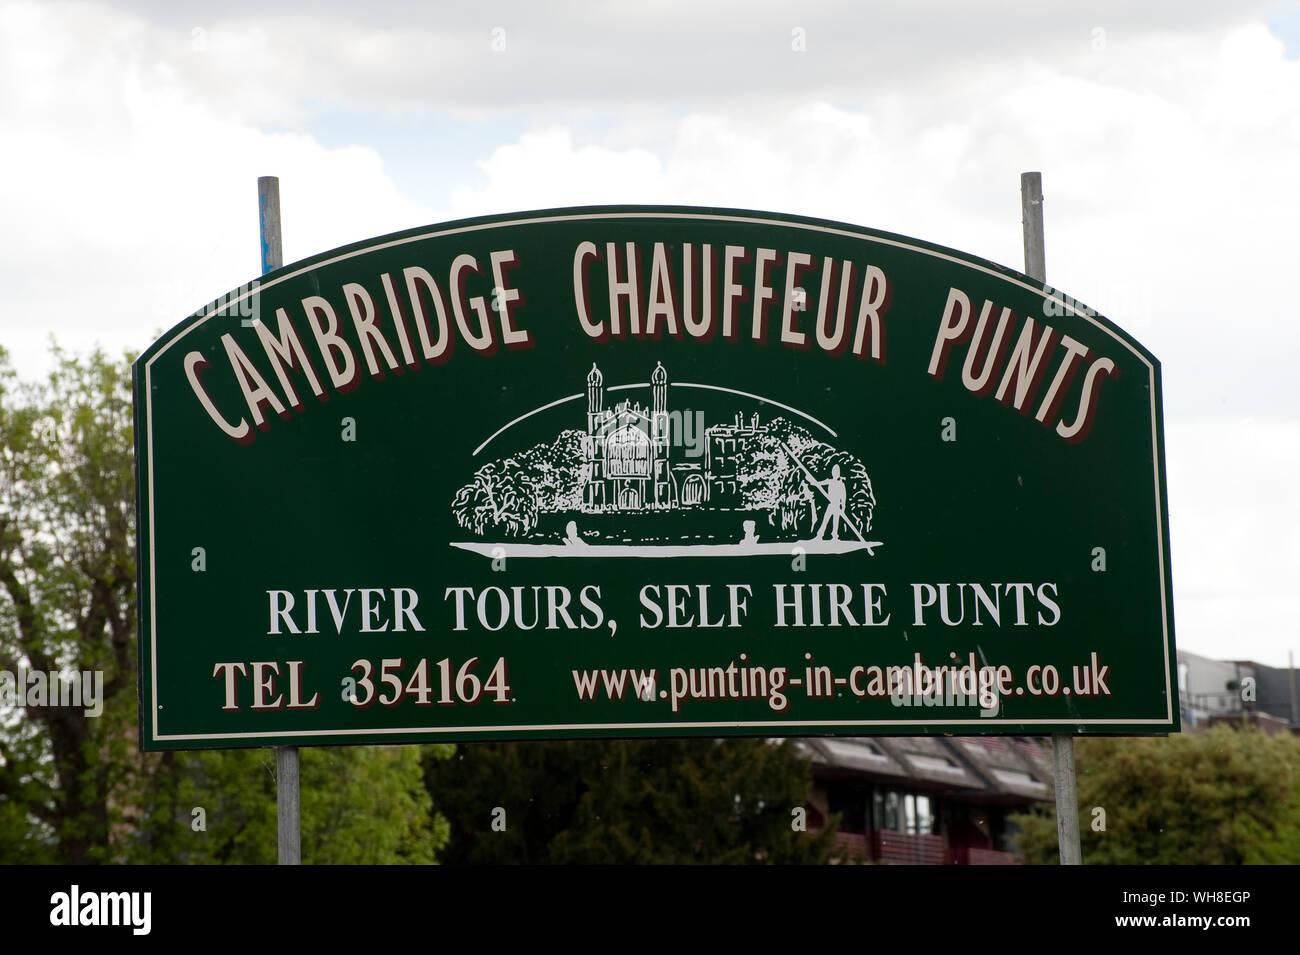 Sign for chauffeur punts on the River Cam, Cambridge, England. Stock Photo